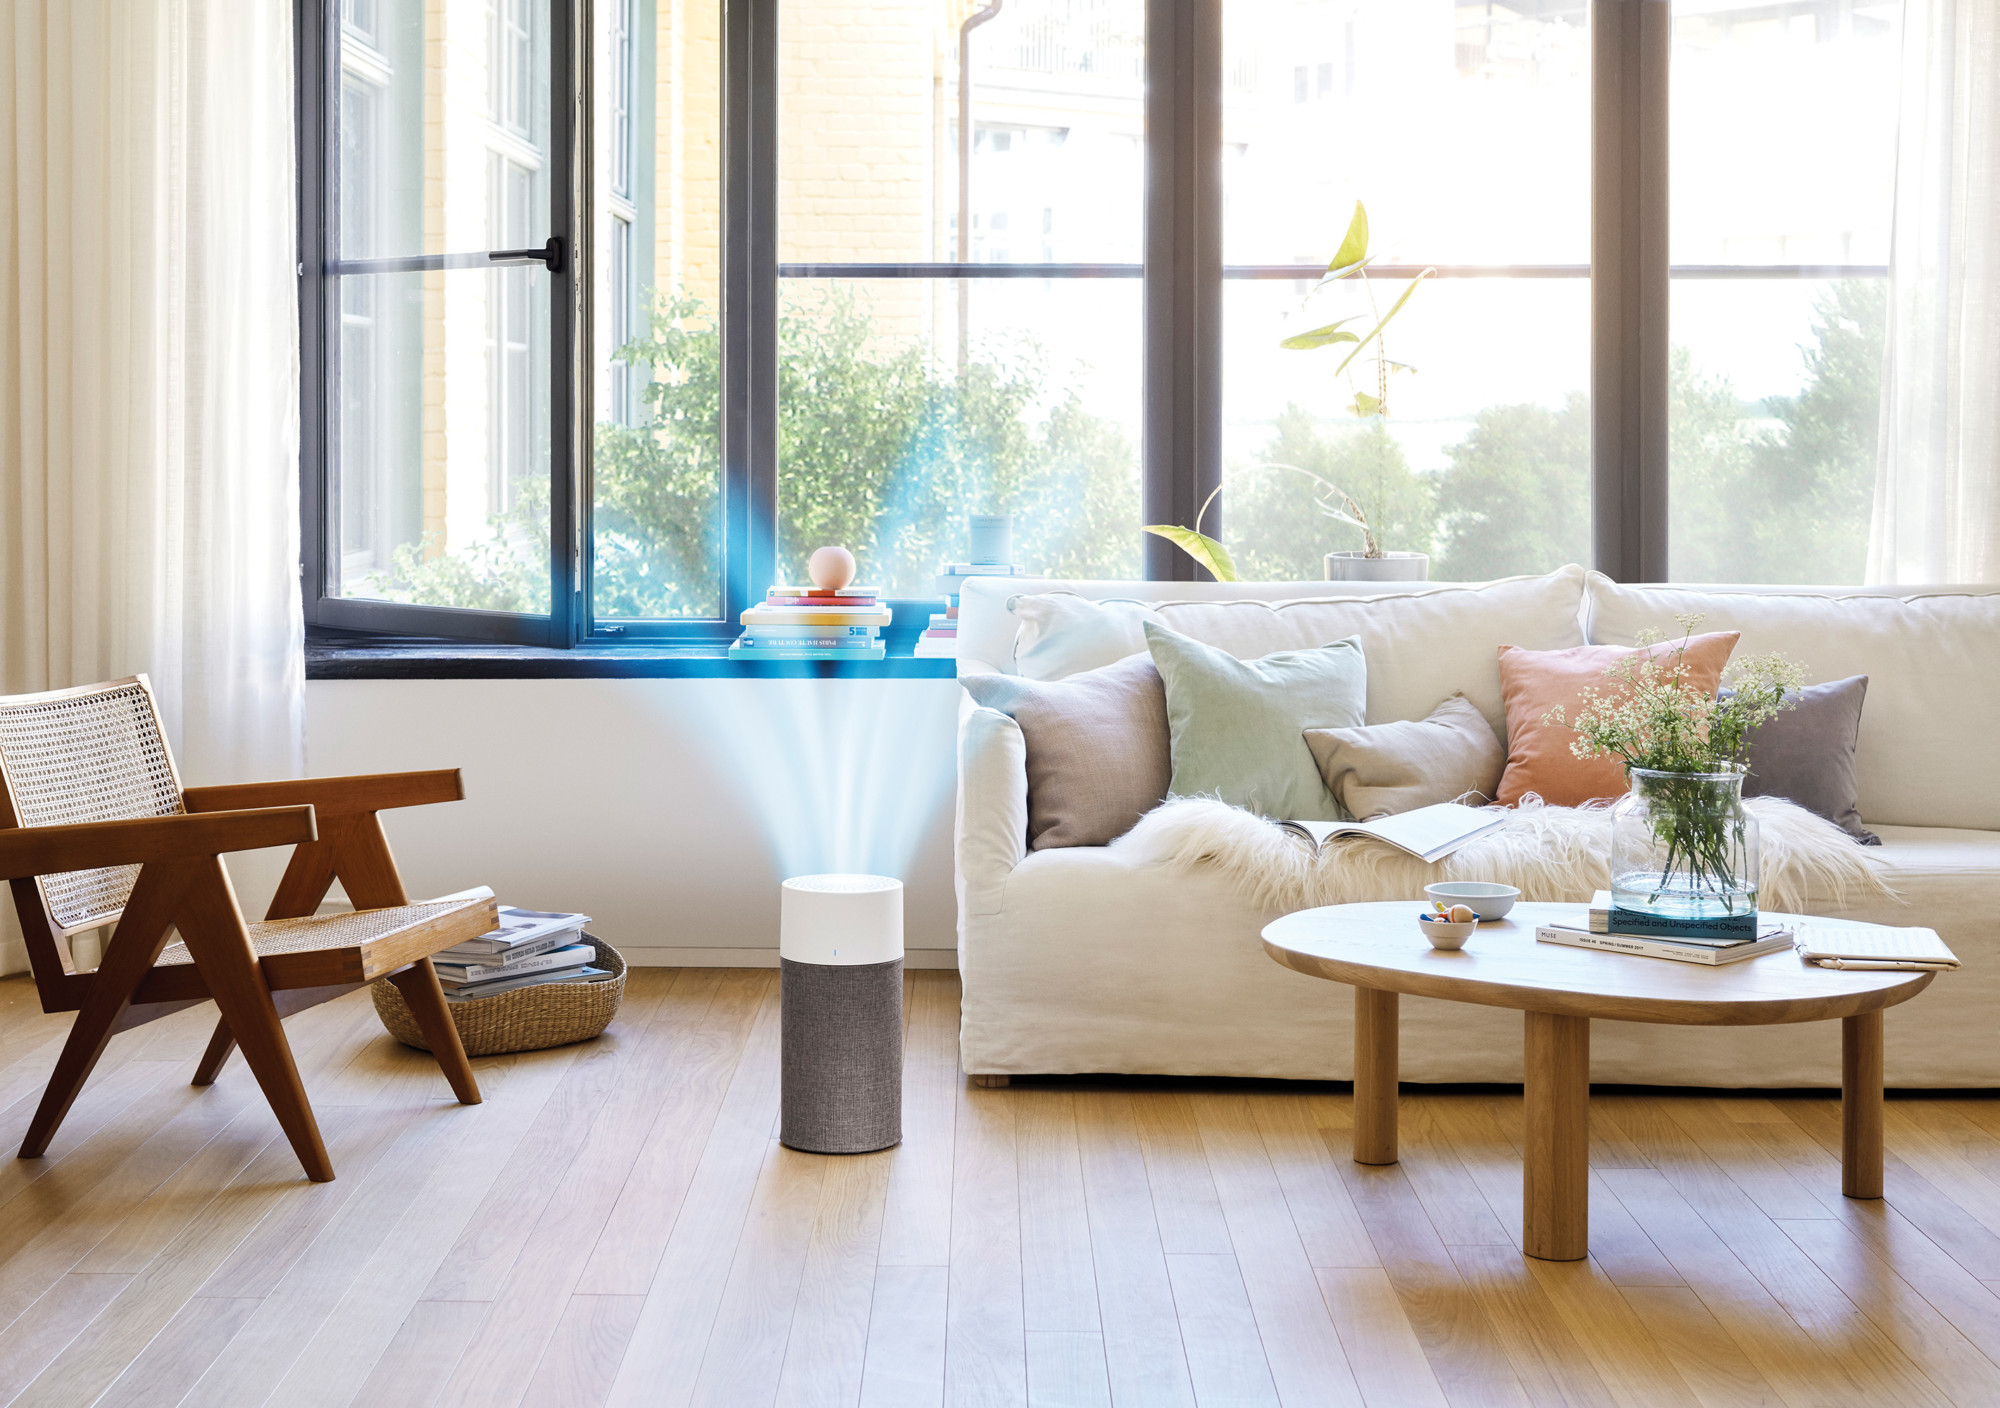 Relive your allergies and boost your productivity at home with an air purifier.